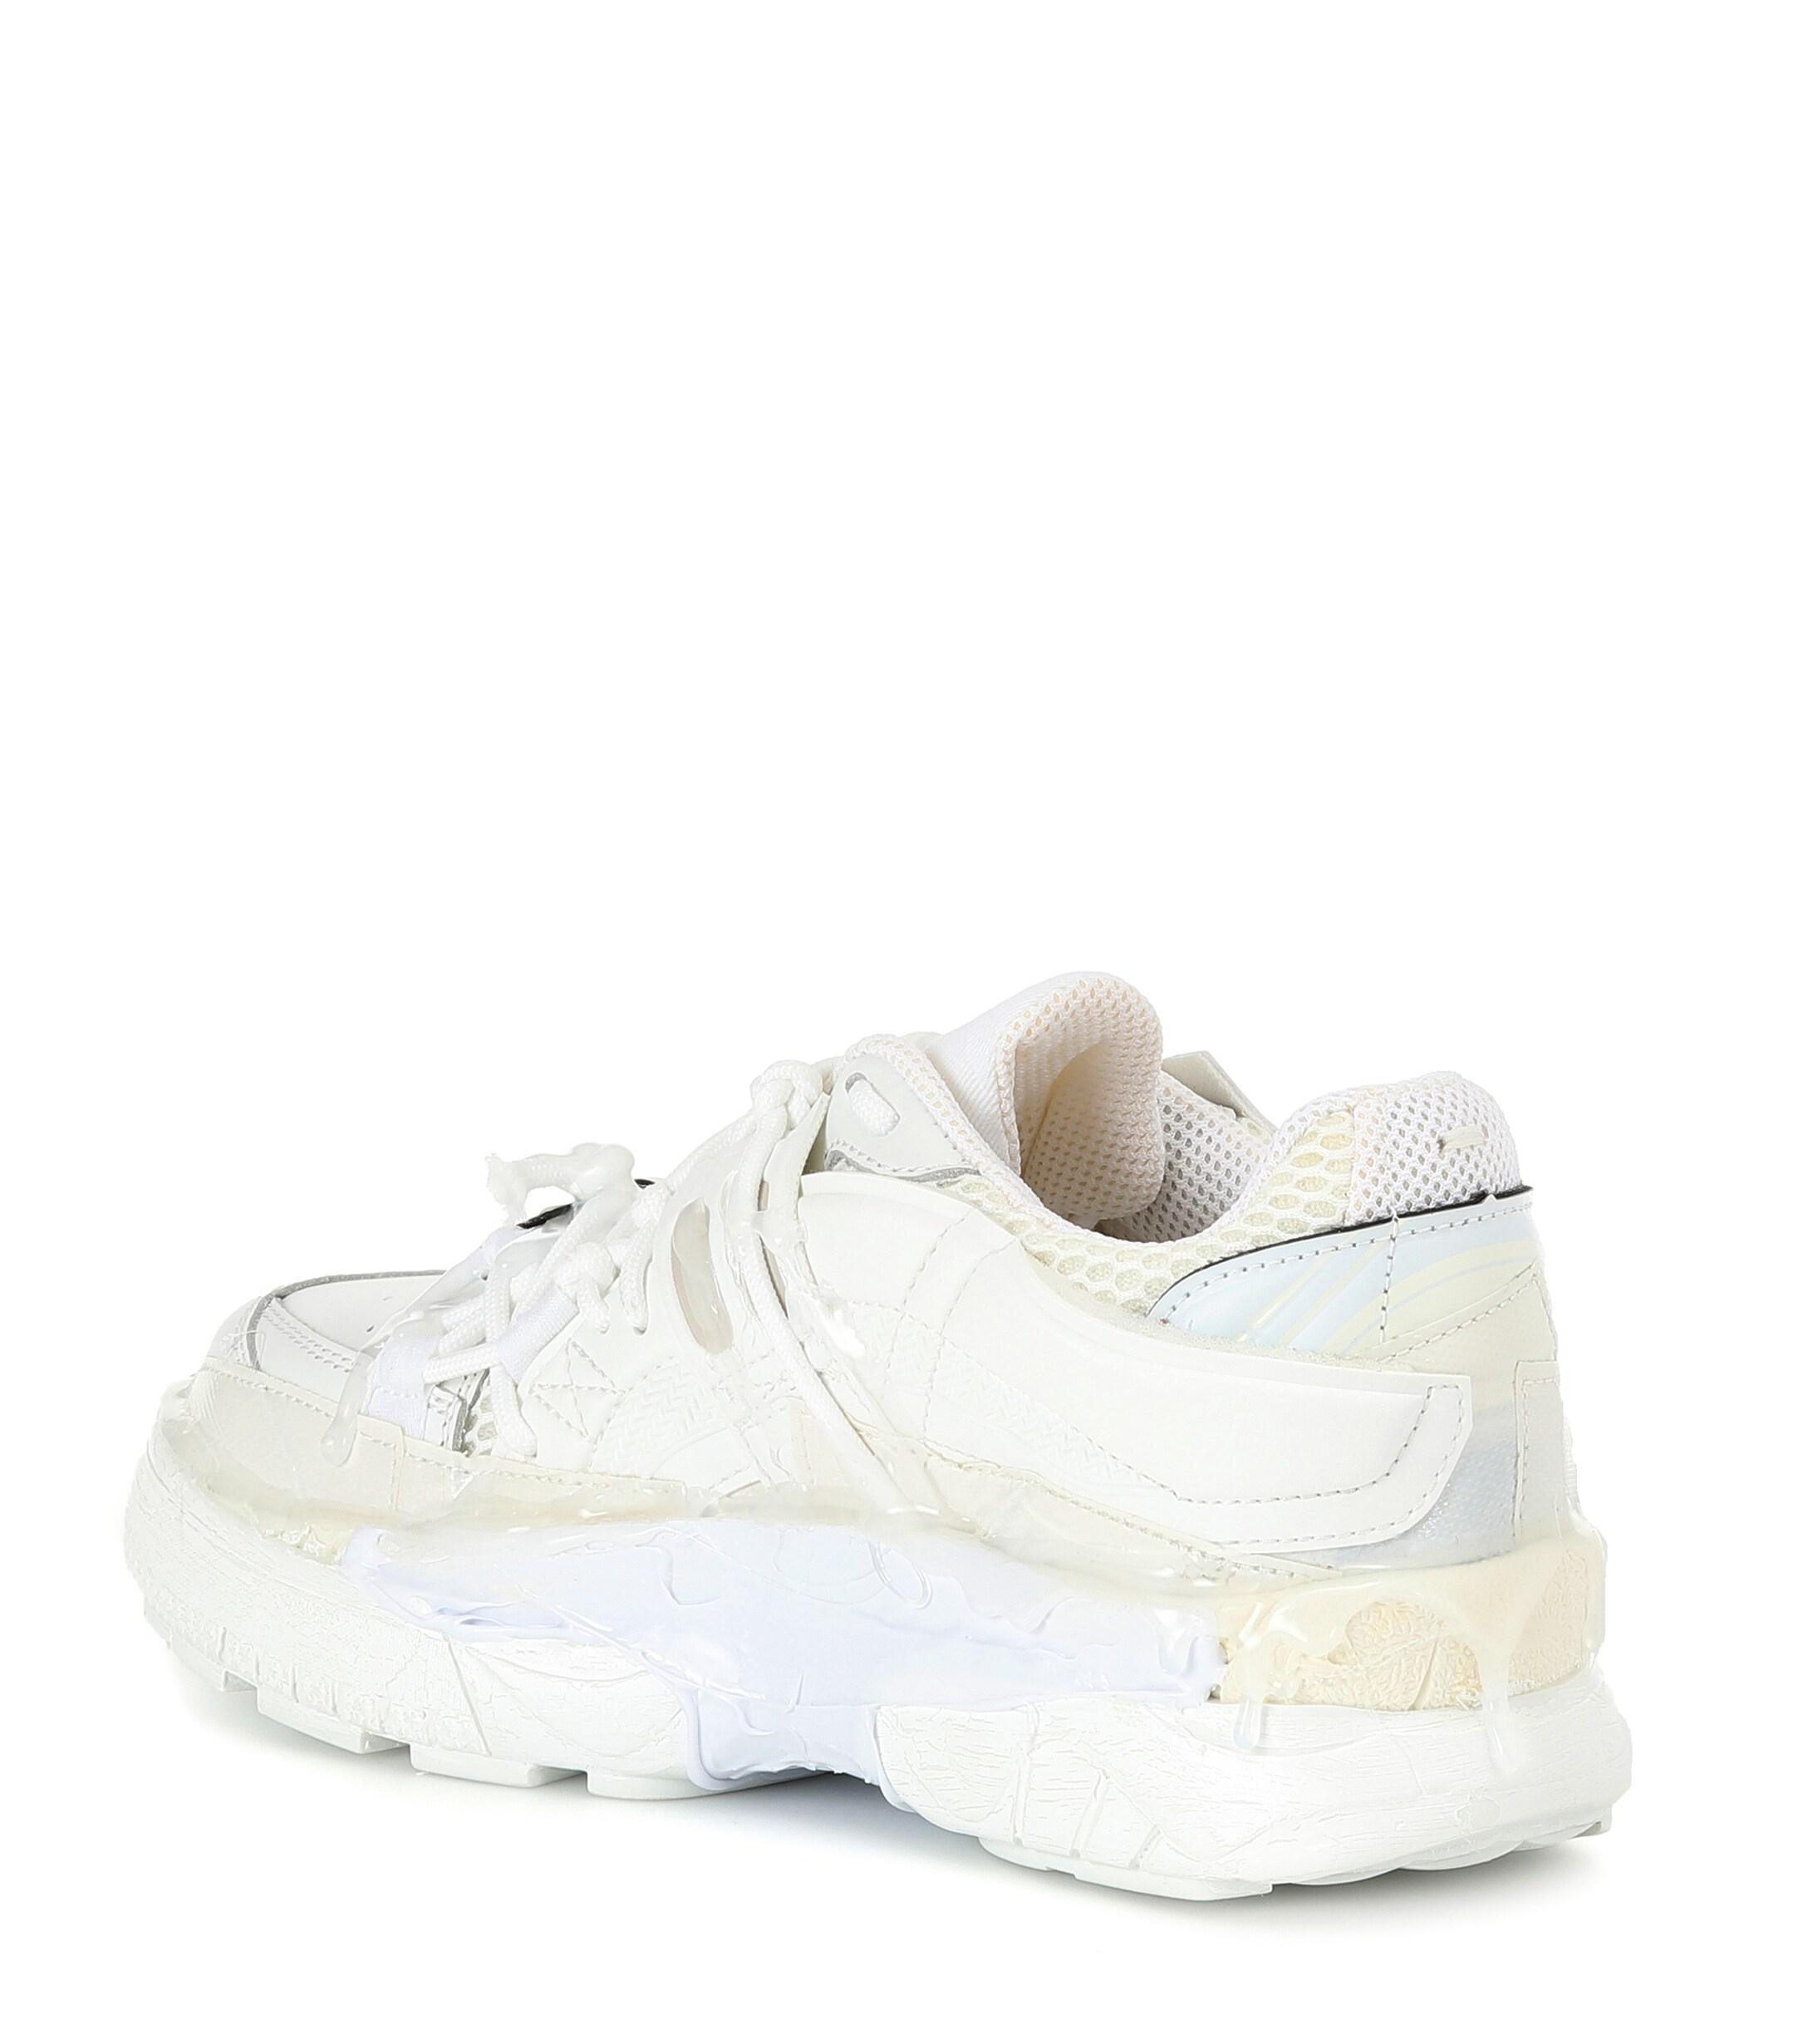 Maison Margiela Fusion Leather Sneakers in White - Lyst